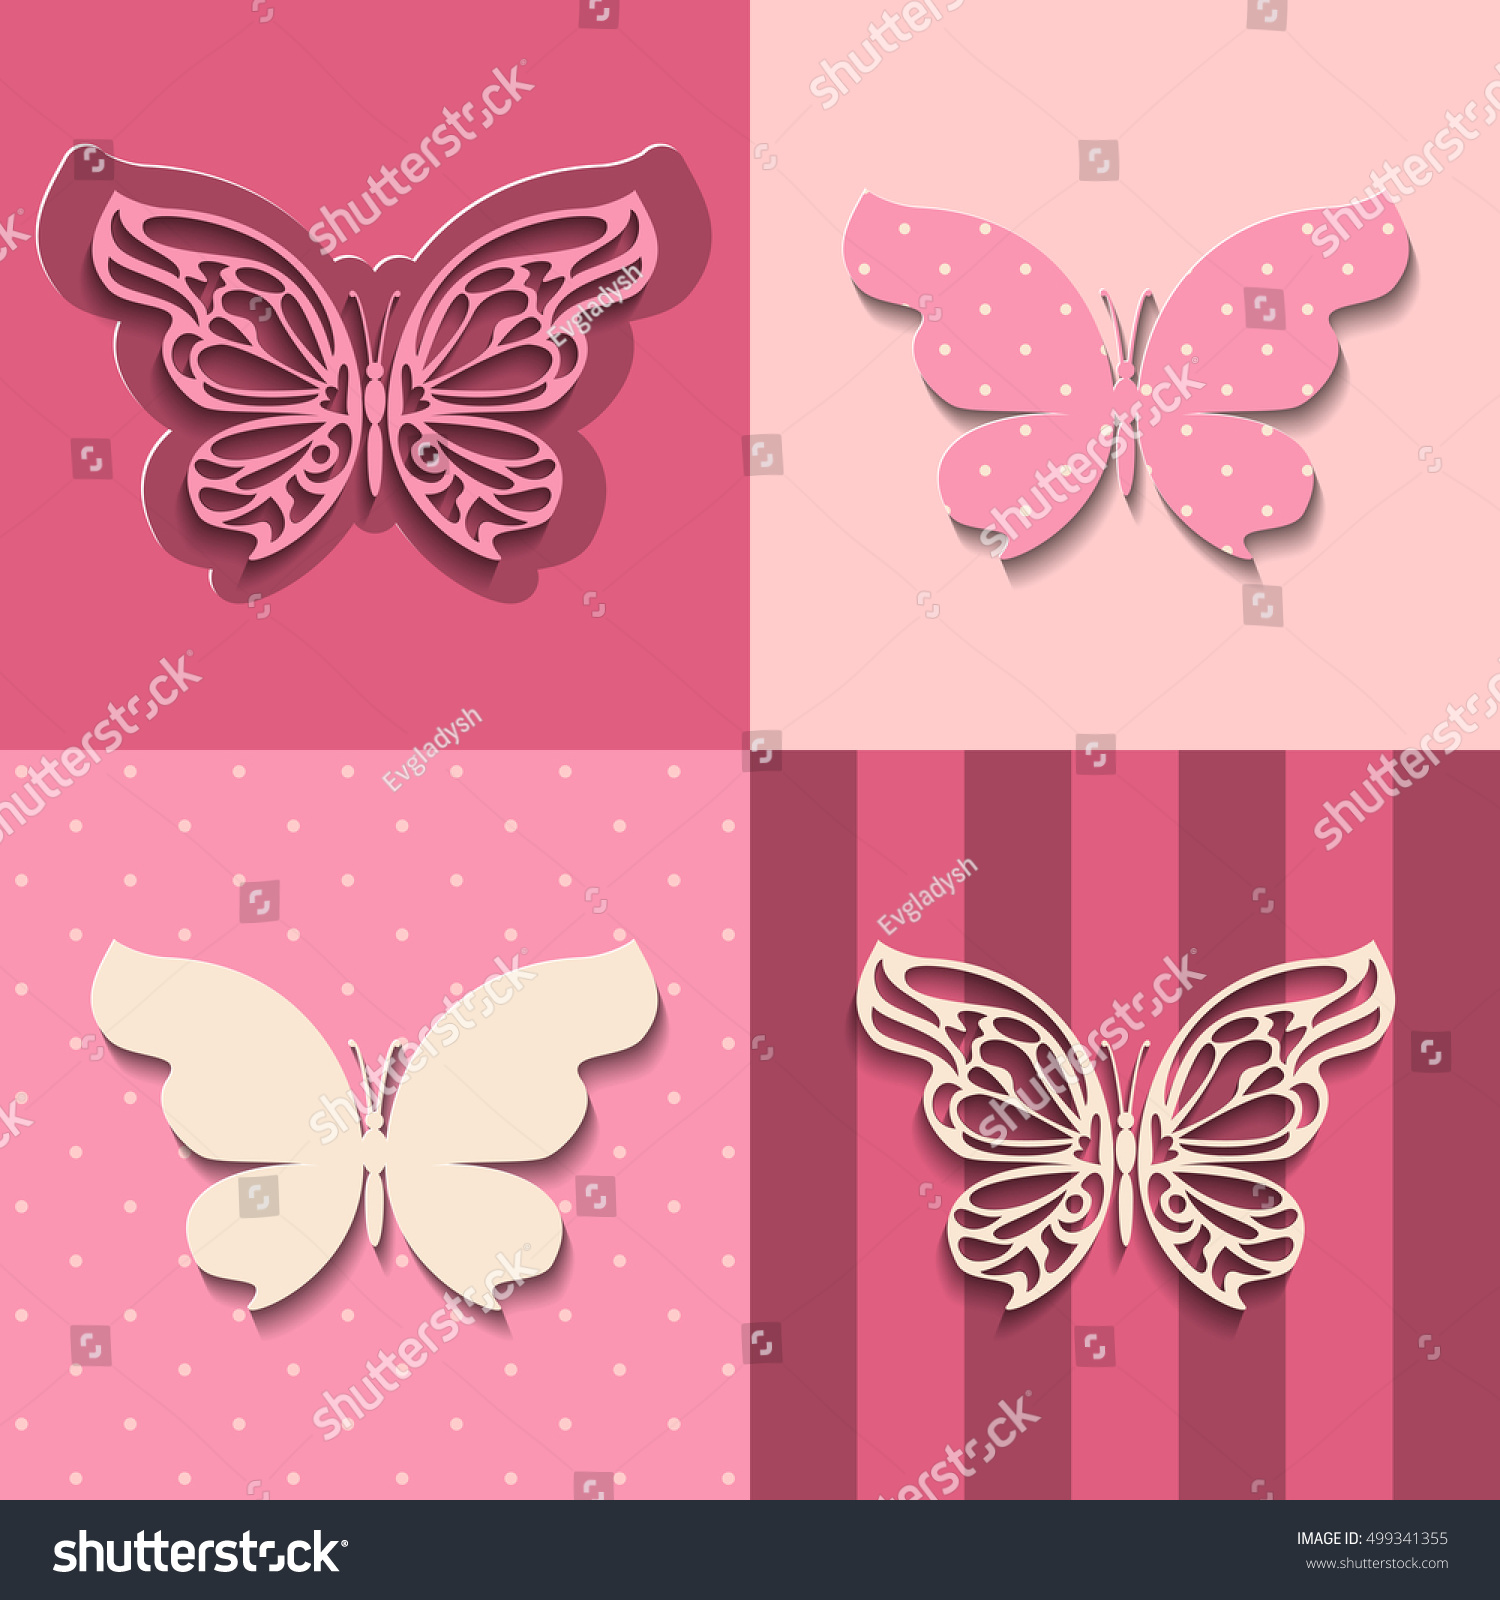 Download Paper Cut Lacy Butterfly Seamless Pattern Stock Vector ...